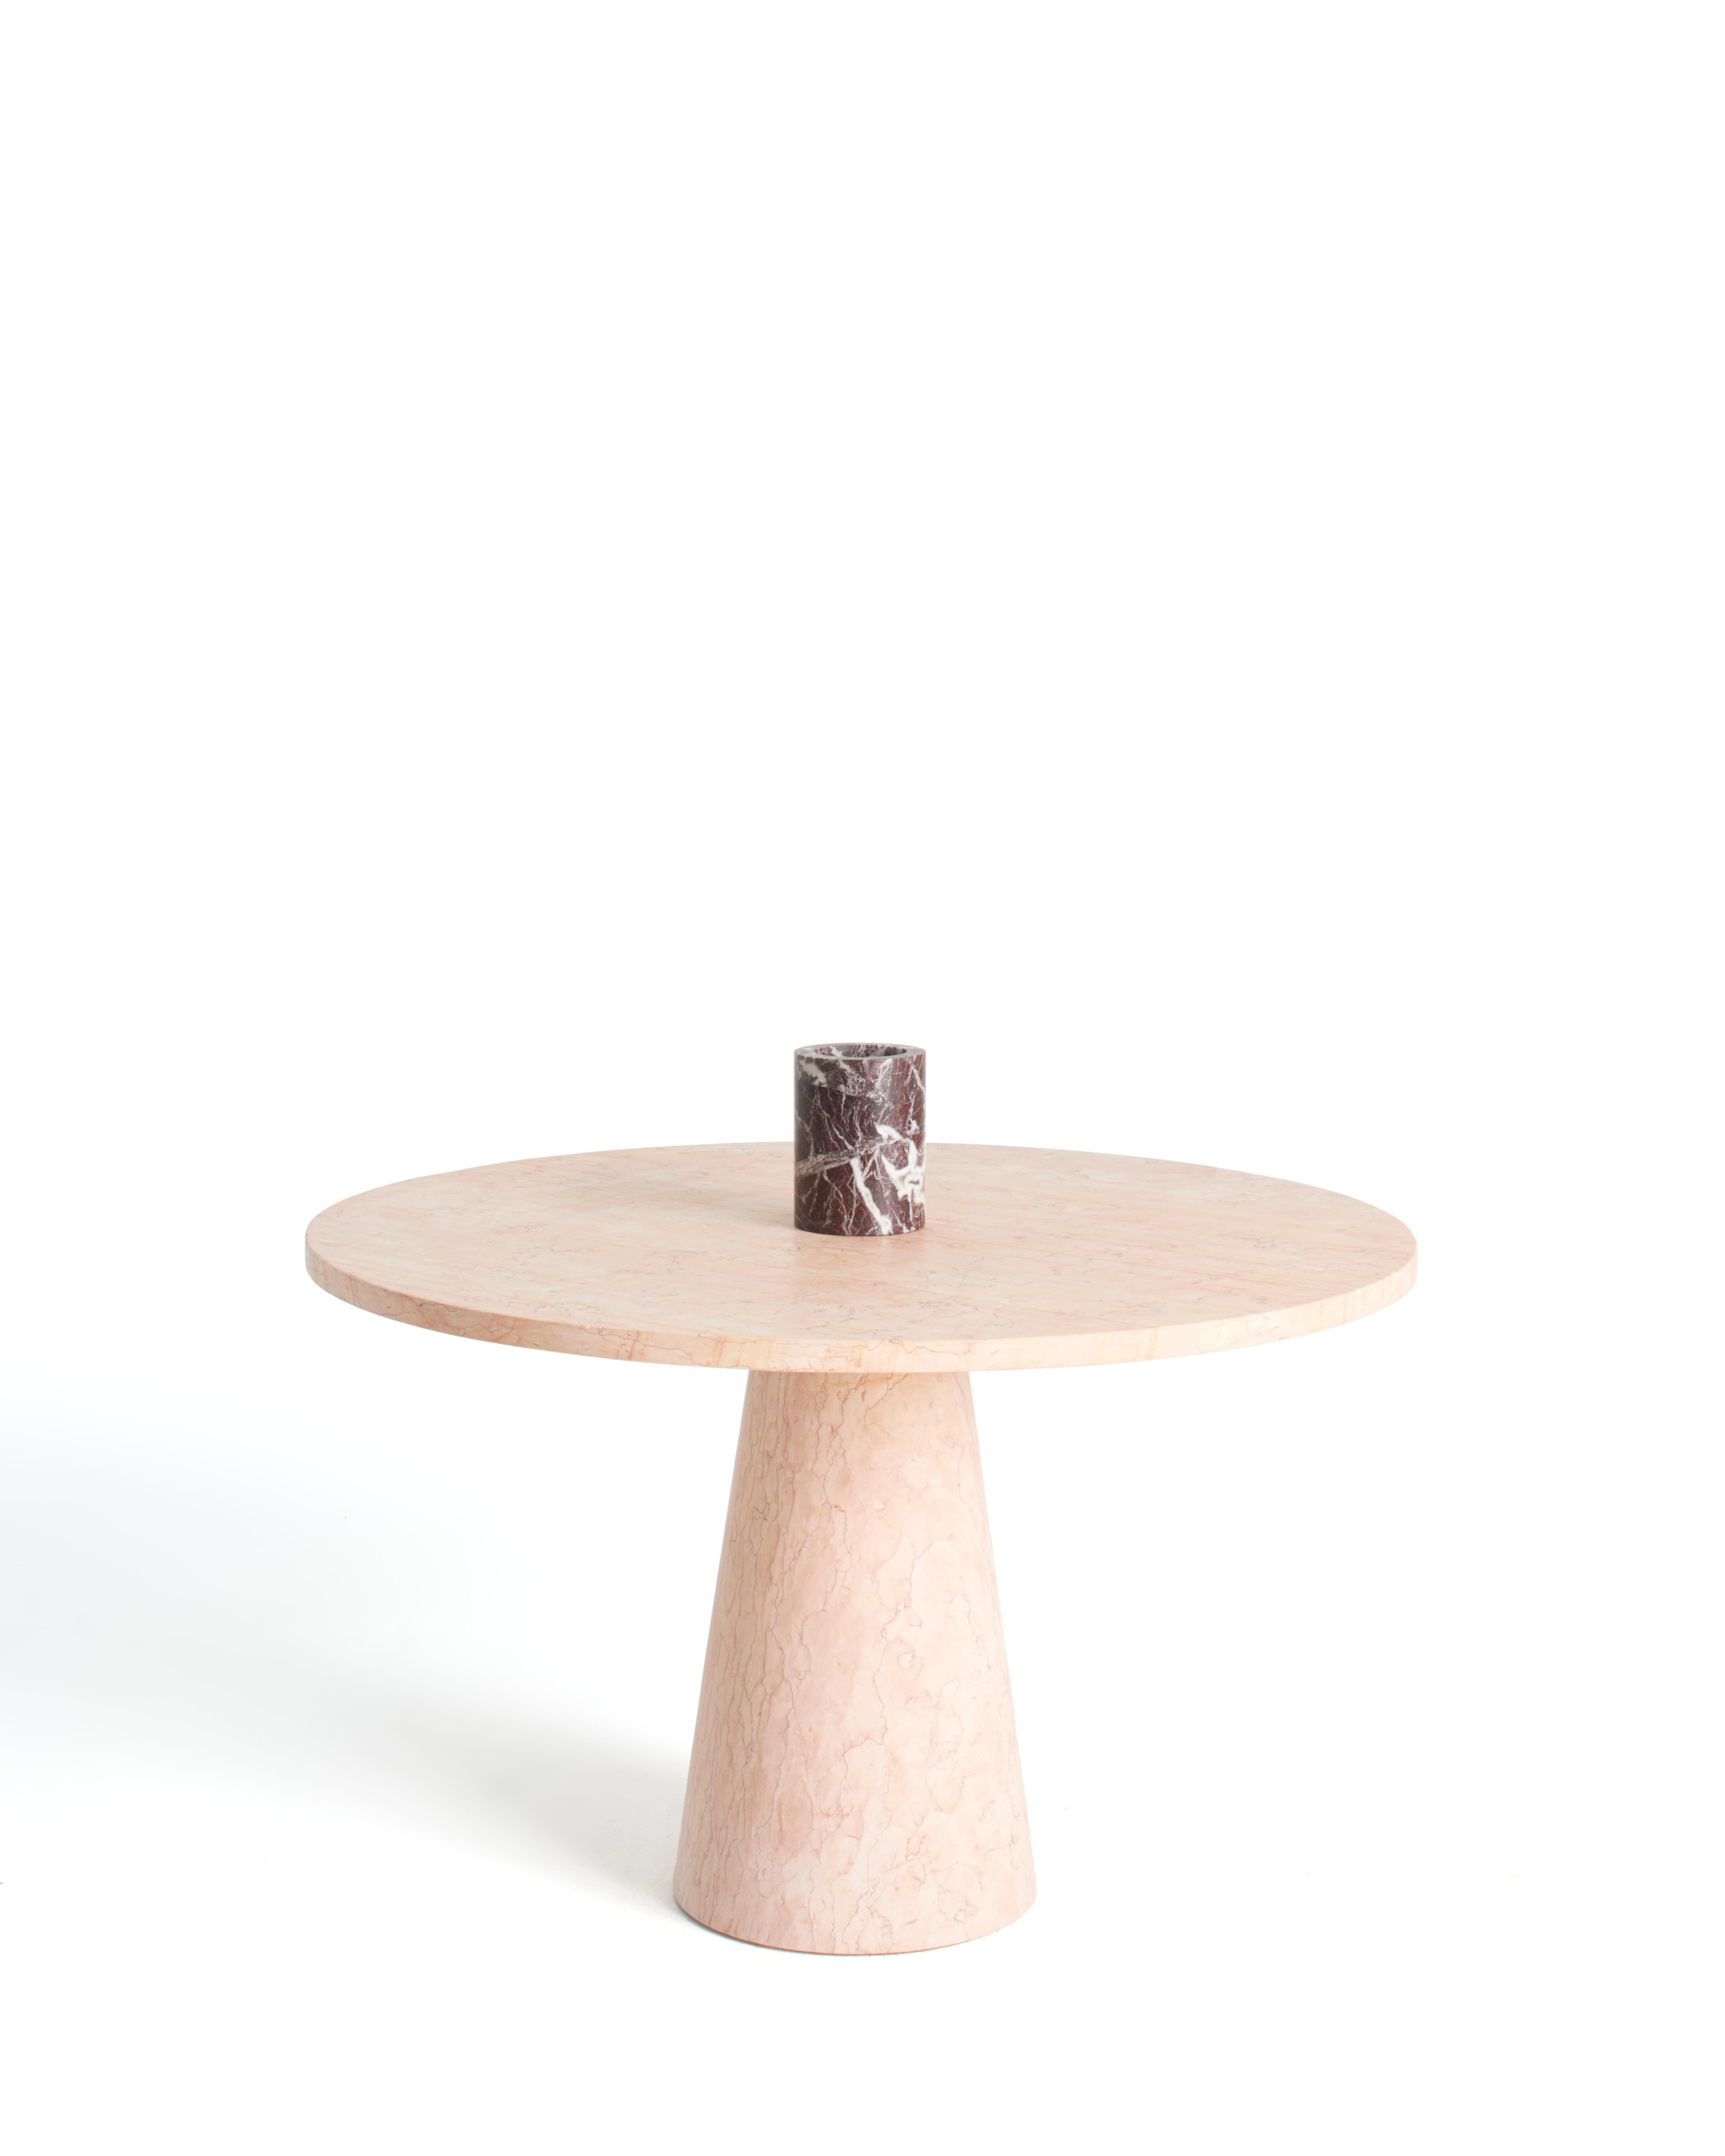 Inside out dining table by Karen Chekerdjian
Dimensions: Ø top 120 x Ø base 40 x 74
Materials: Rosa Egiziano

Karen’s trajectory into designing was unsystematic, comprised of a combination of practical experience in various creative fields and